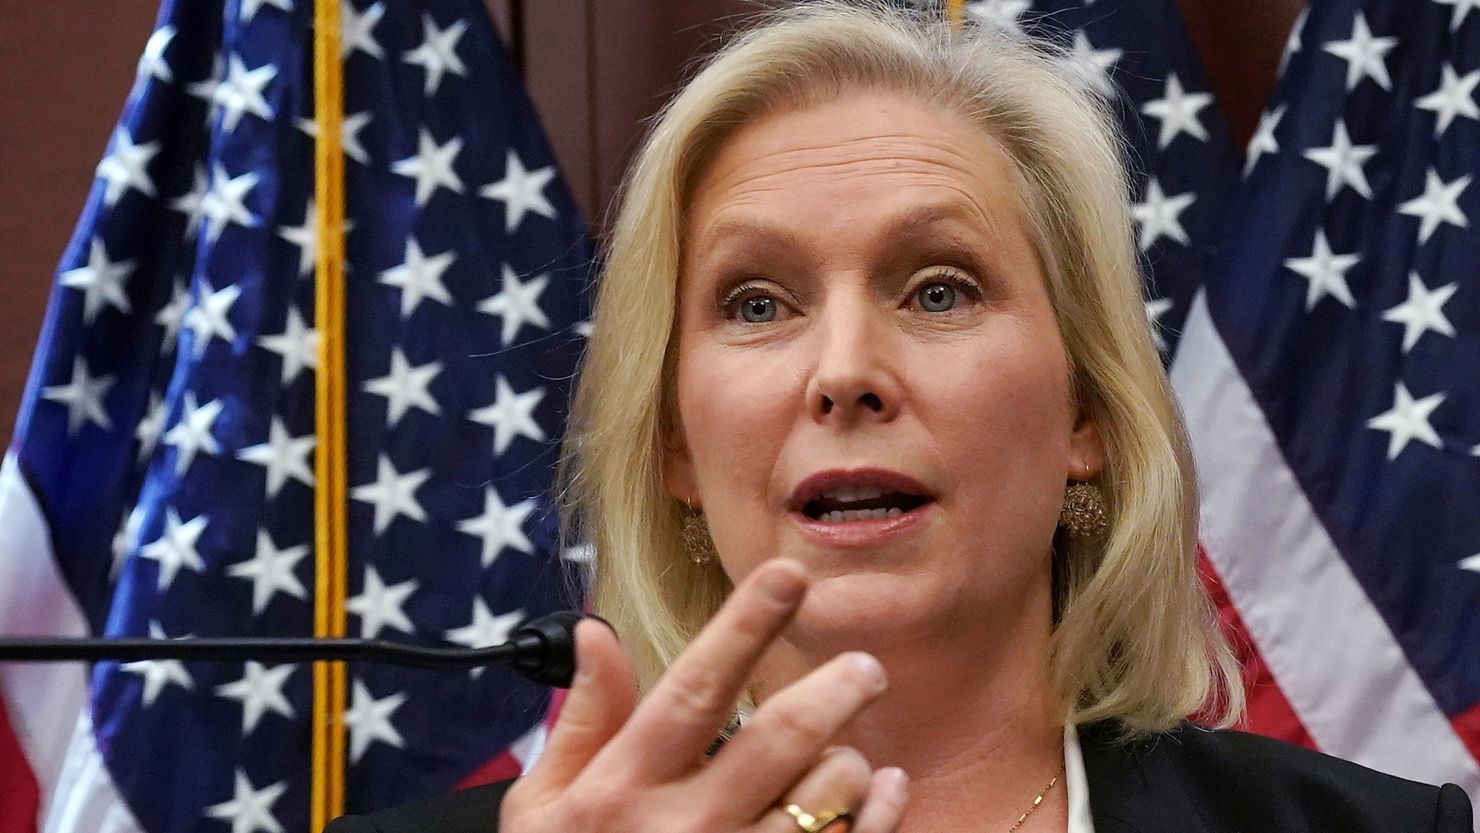 Sen. Kirsten Gillibrand, a New York Democrat, speaks during a news conference in December 2017 on Capitol Hill in Washington, DC. The lawmaker unveiled bipartisan legislation to help prevent sexual harassment. 